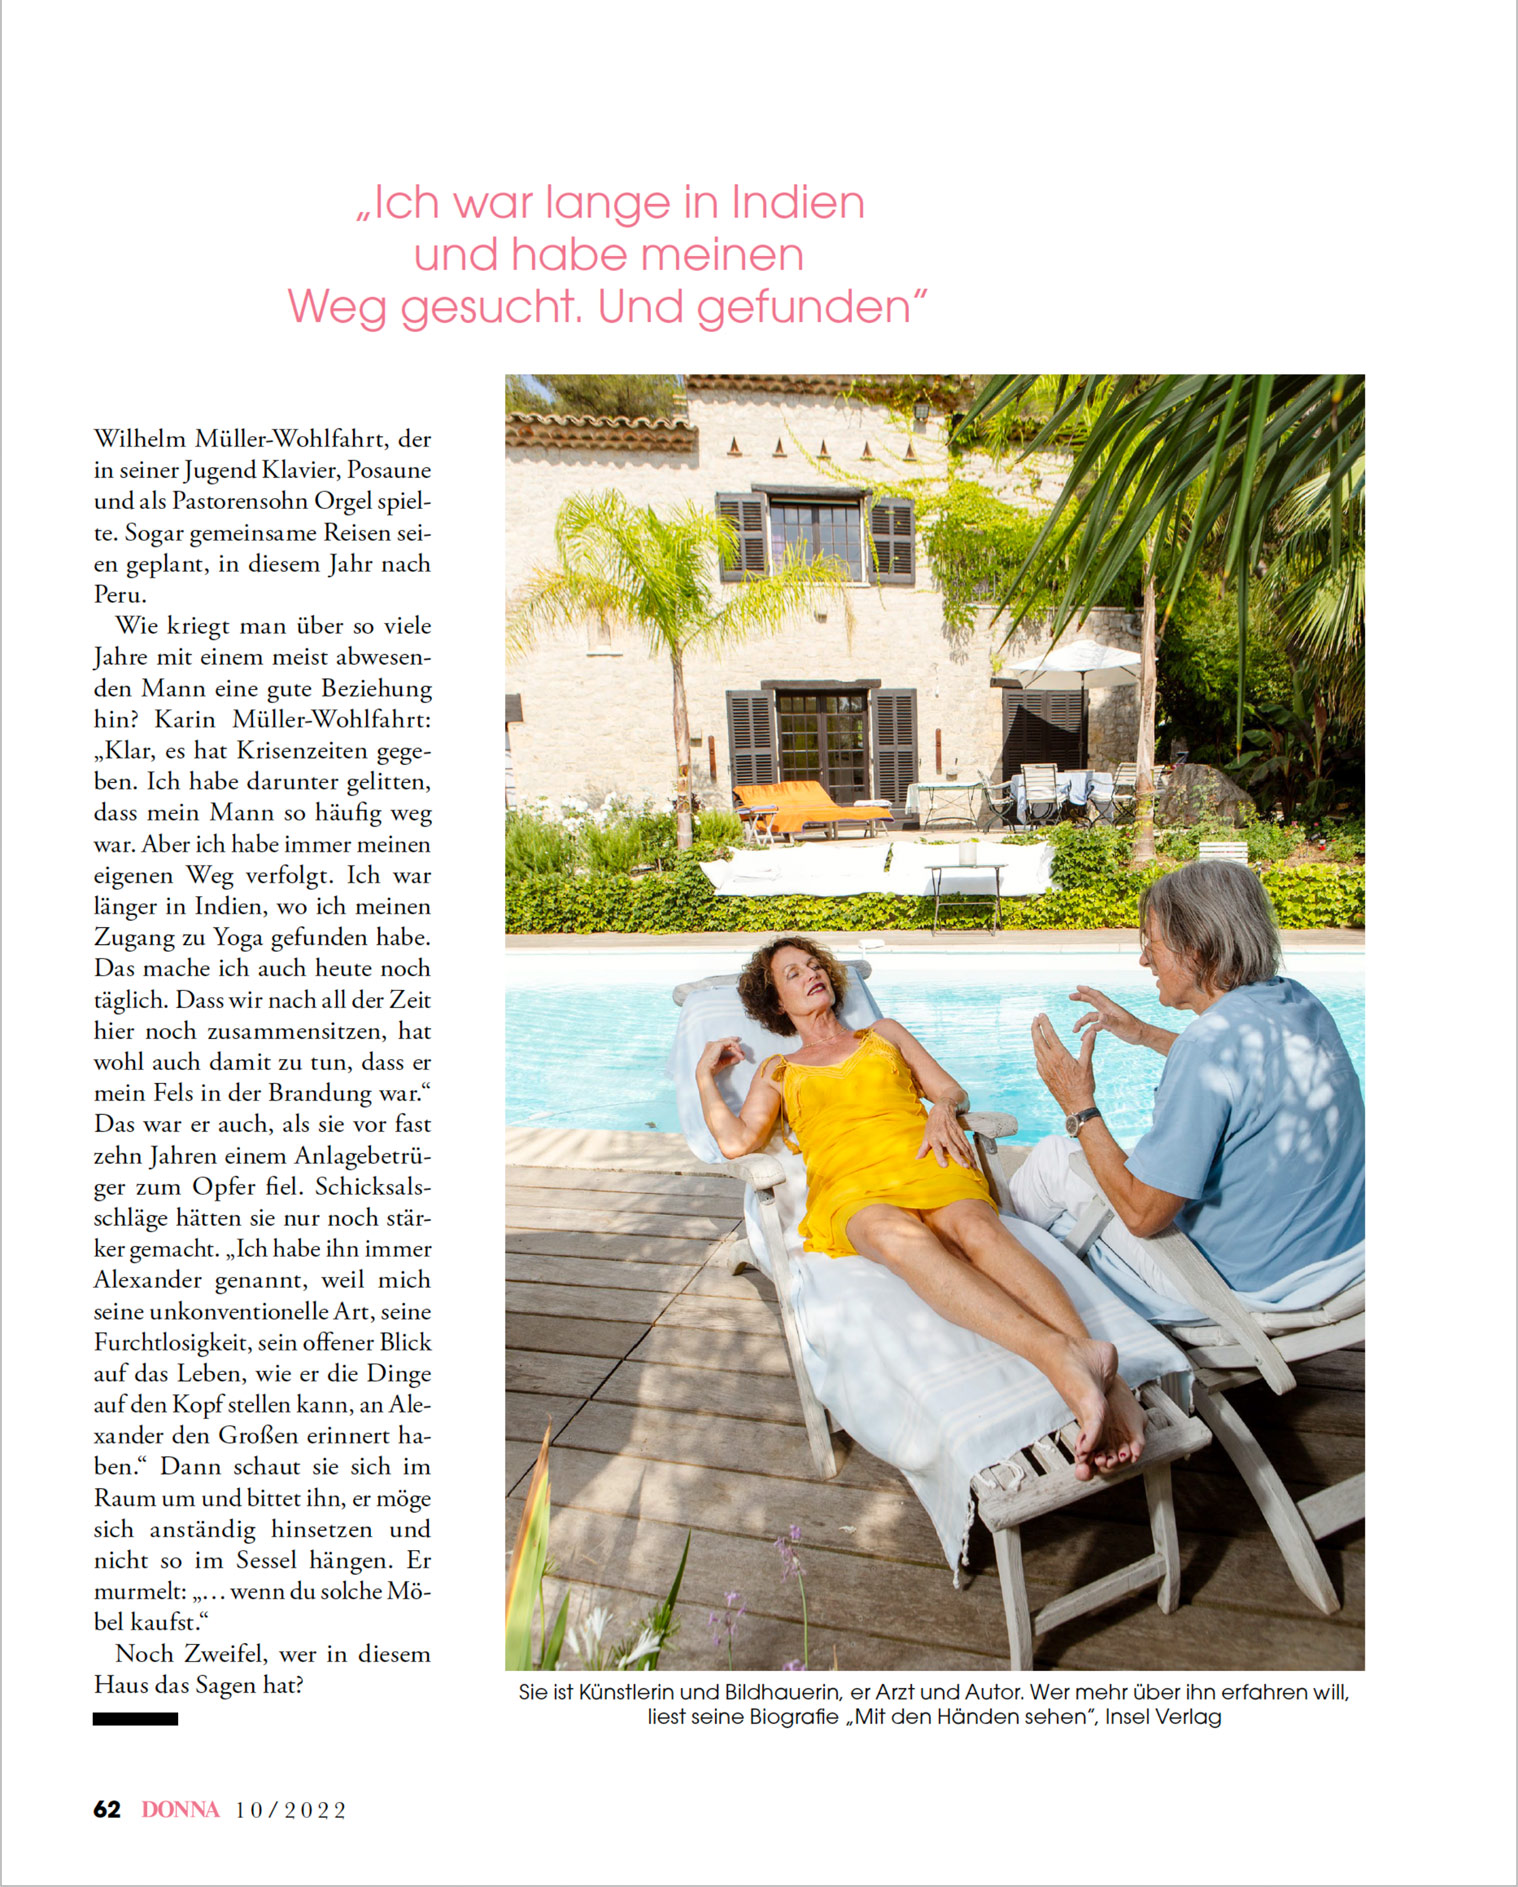 Single page magazine article tearsheet with a photograph of a couple by a swimming pool and text